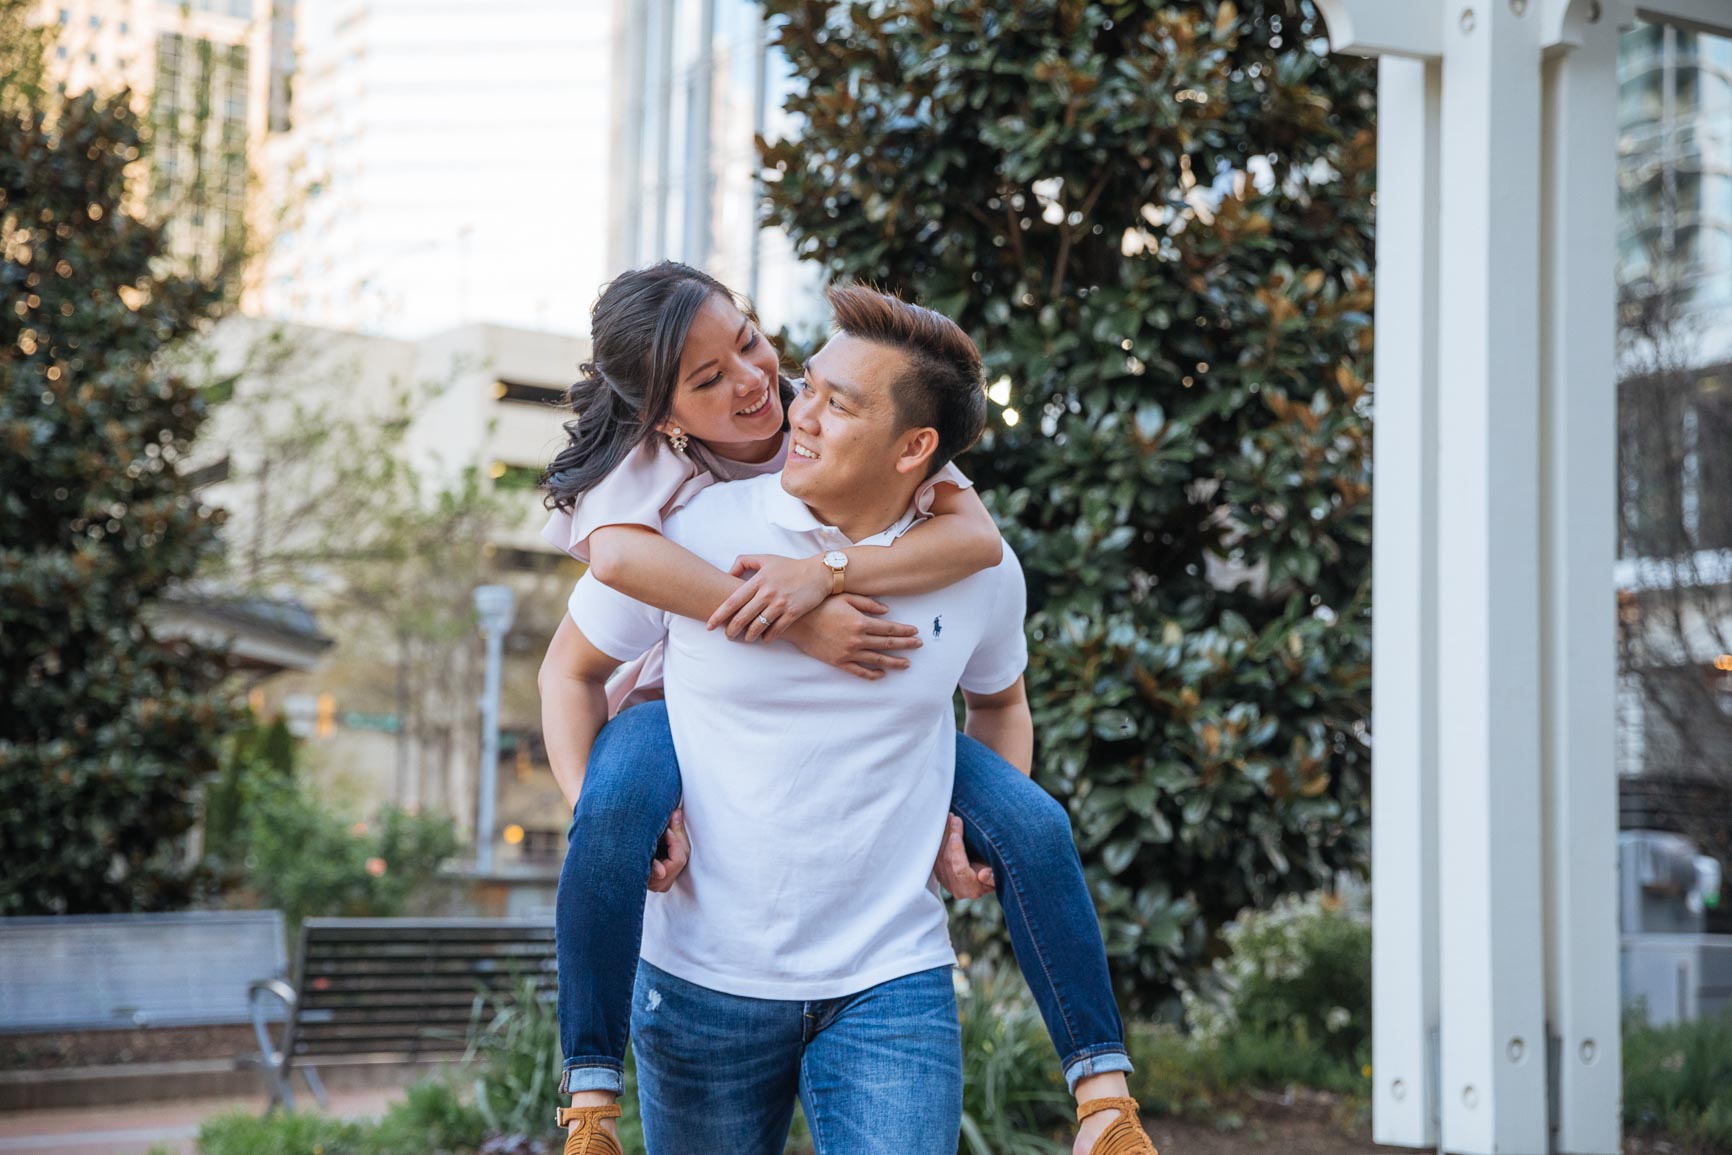 Uptown Charlotte engagement session at Romare Bearden Park photographed by nhieu tang photography | nhieutang.com